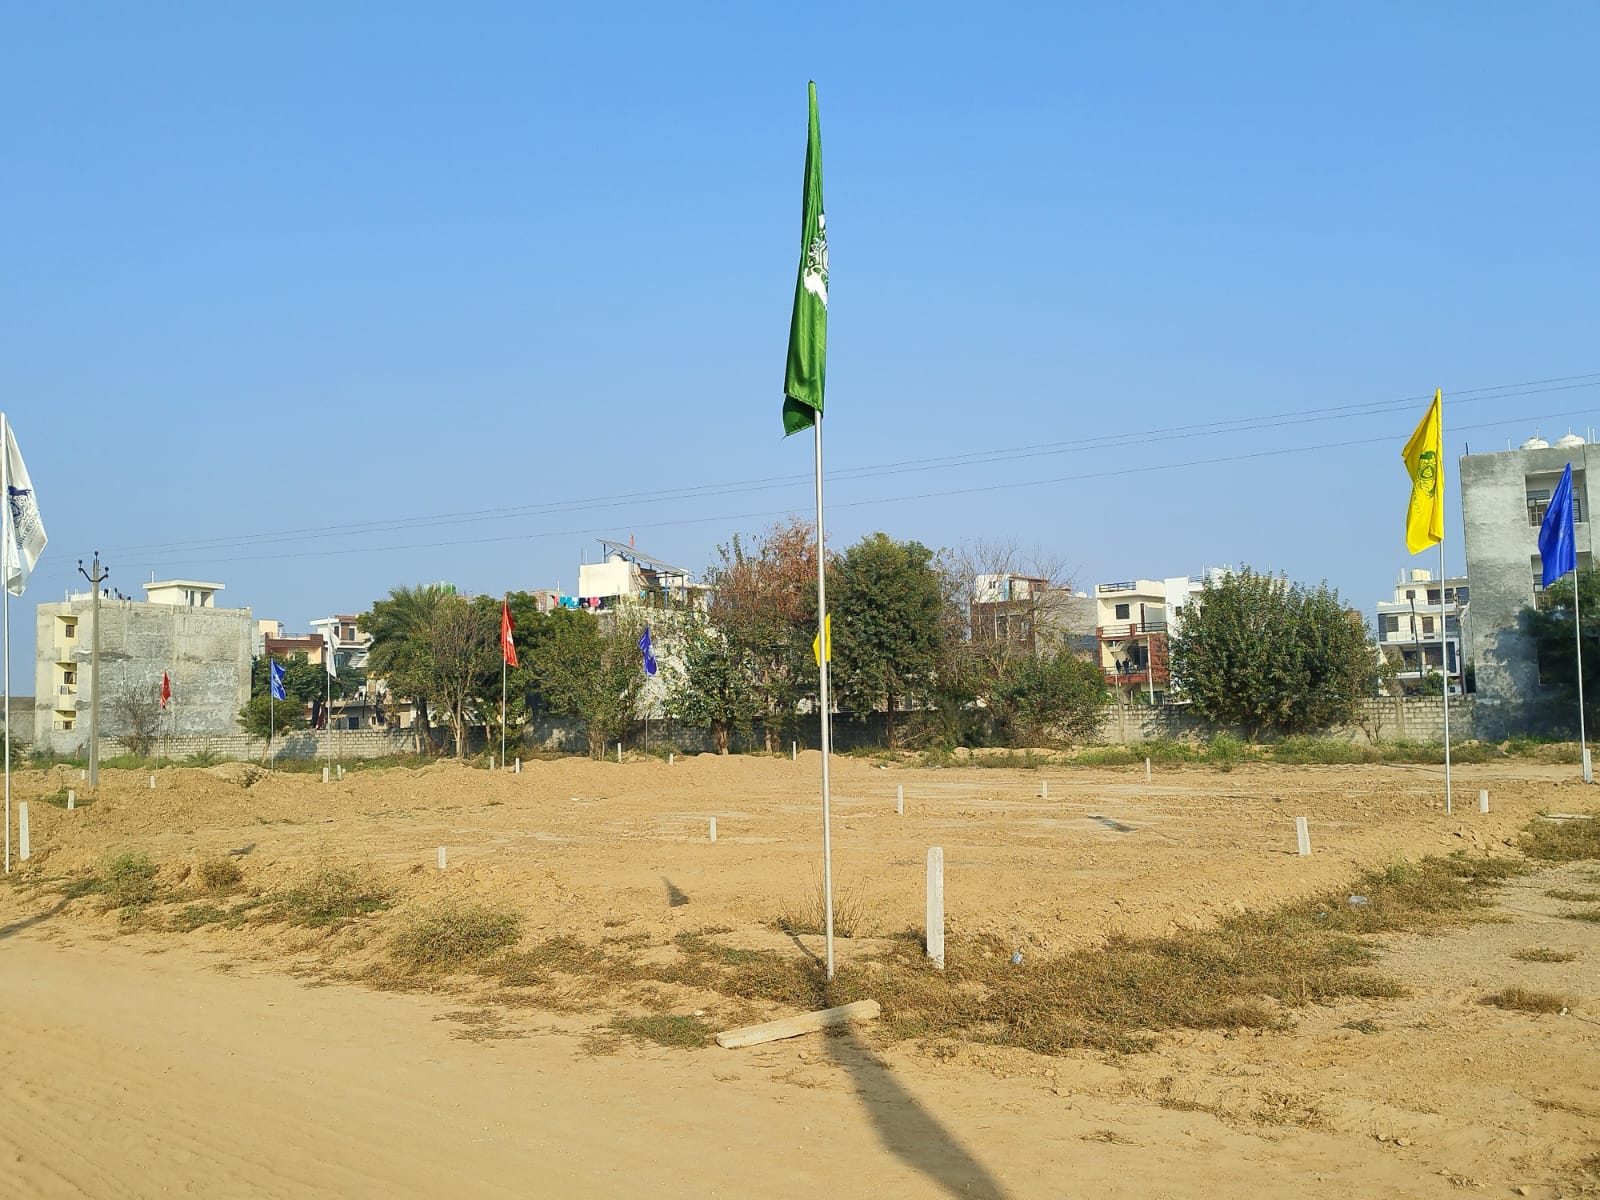 Buy Residential Plots in Mohali | Countryside Greens